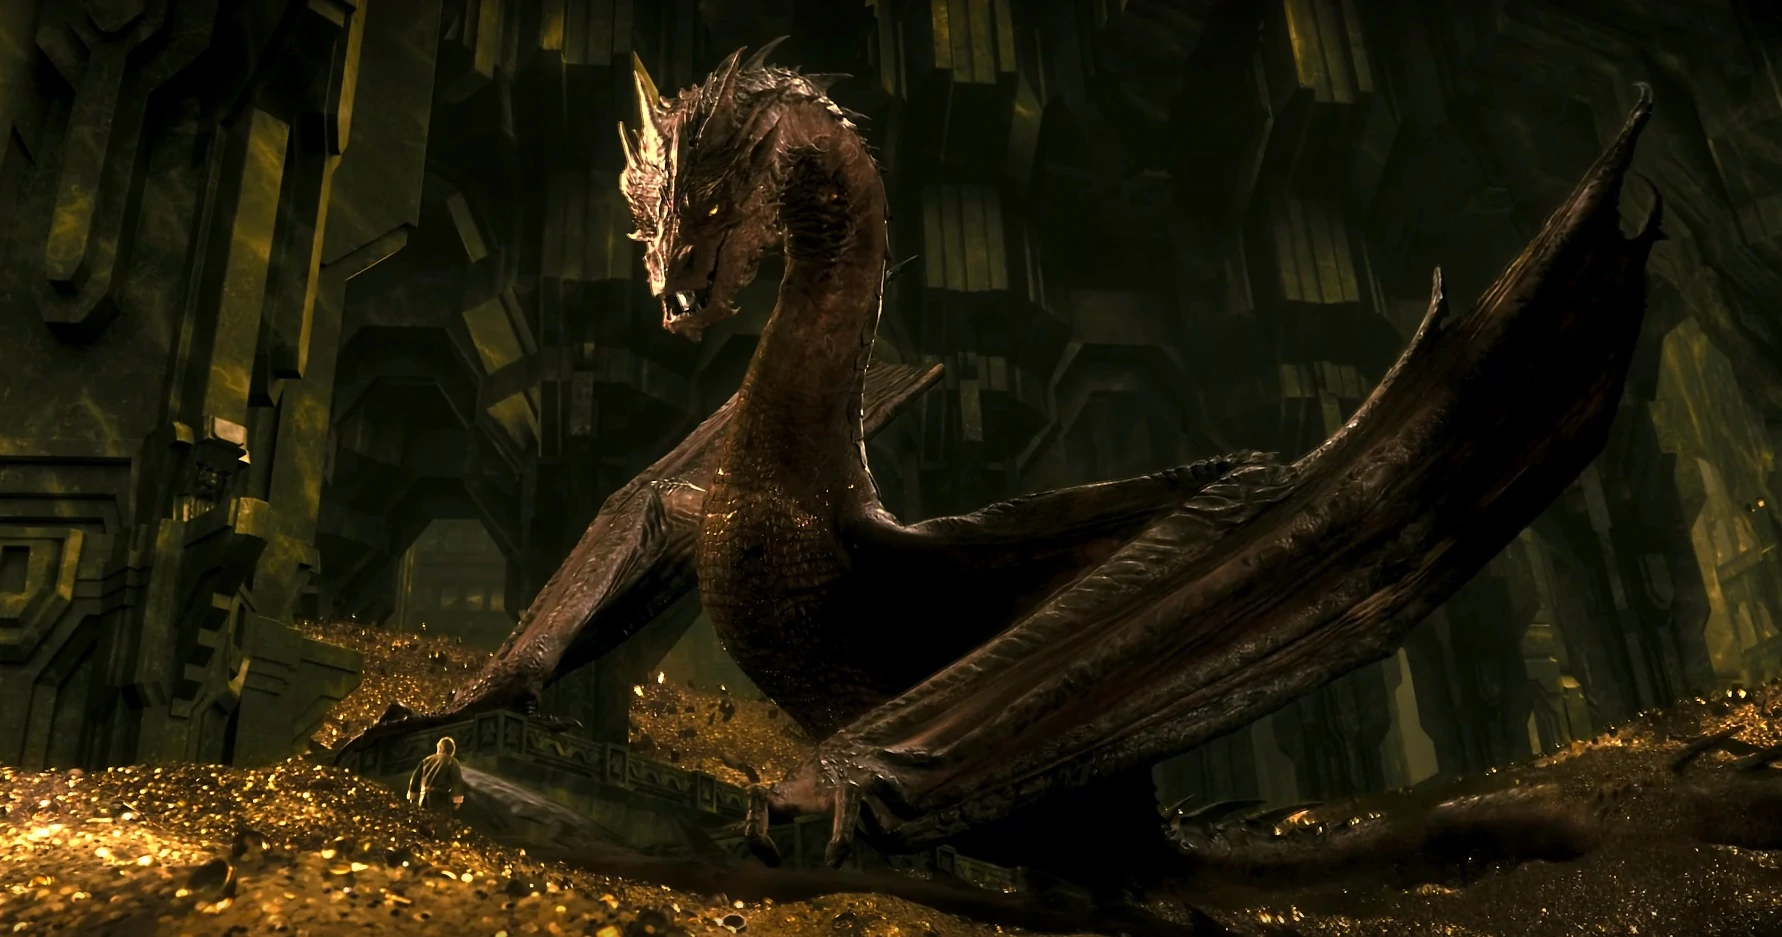 Smaug vs Drogon - Fight to the death